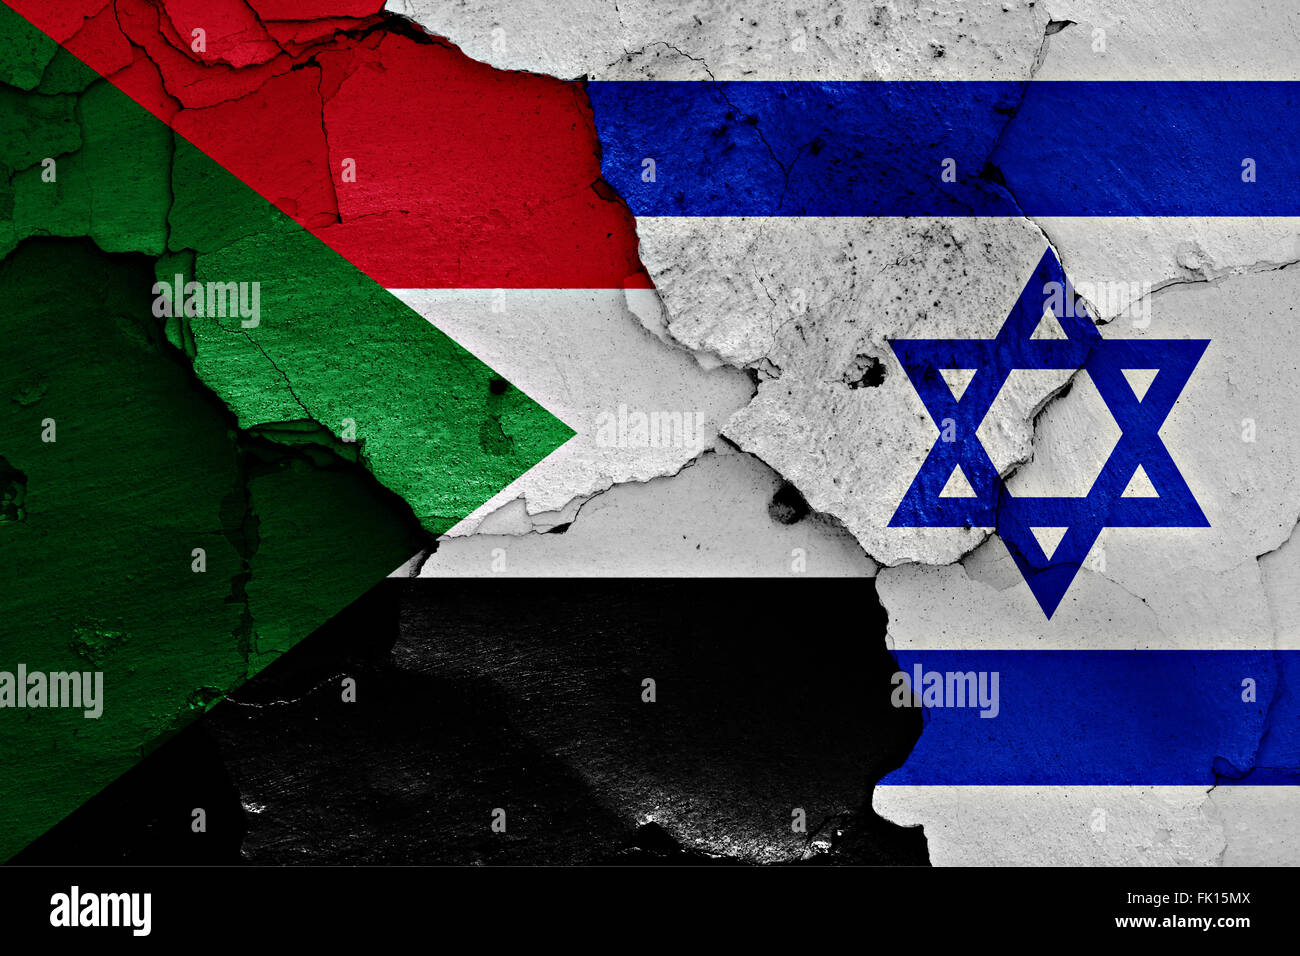 flags of Sudan and Israel painted on cracked wall Stock Photo